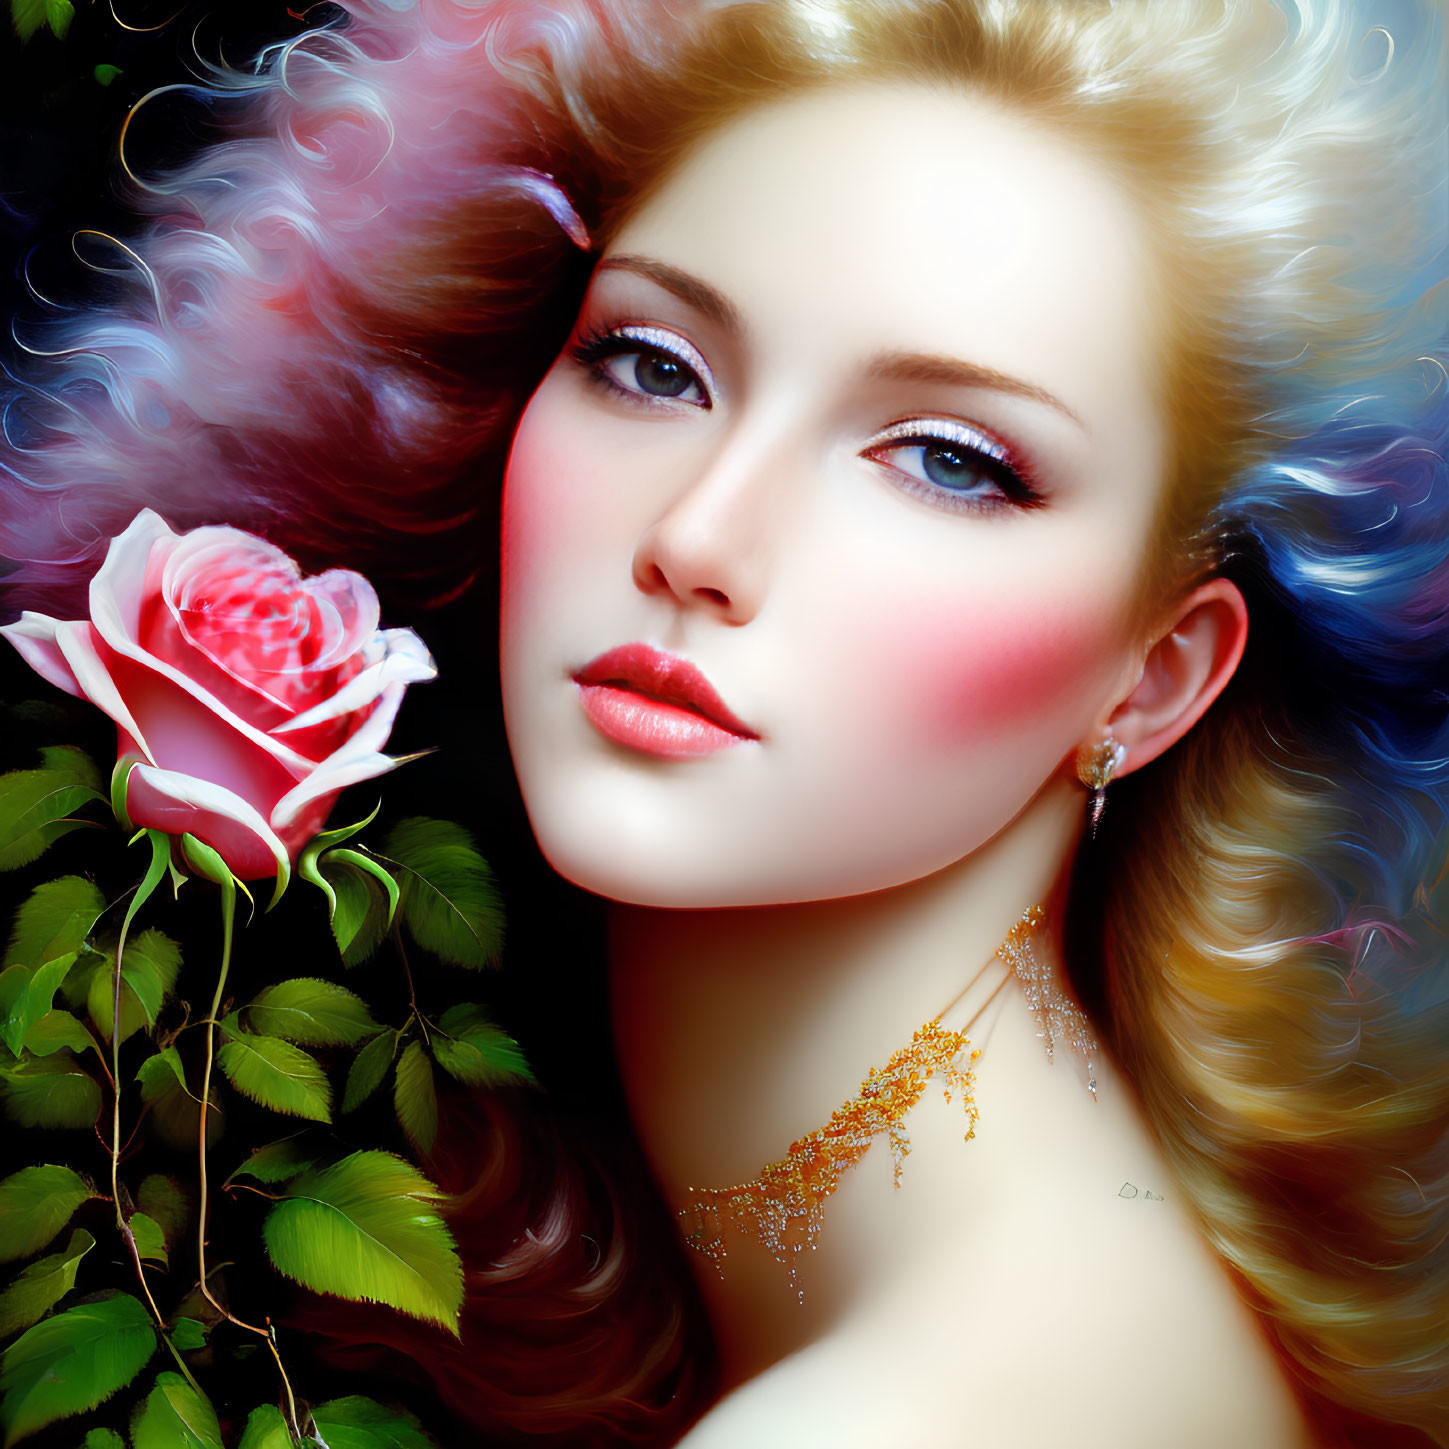 Colorful portrait of a woman with multicolored hair and blue eyes holding a pink rose.